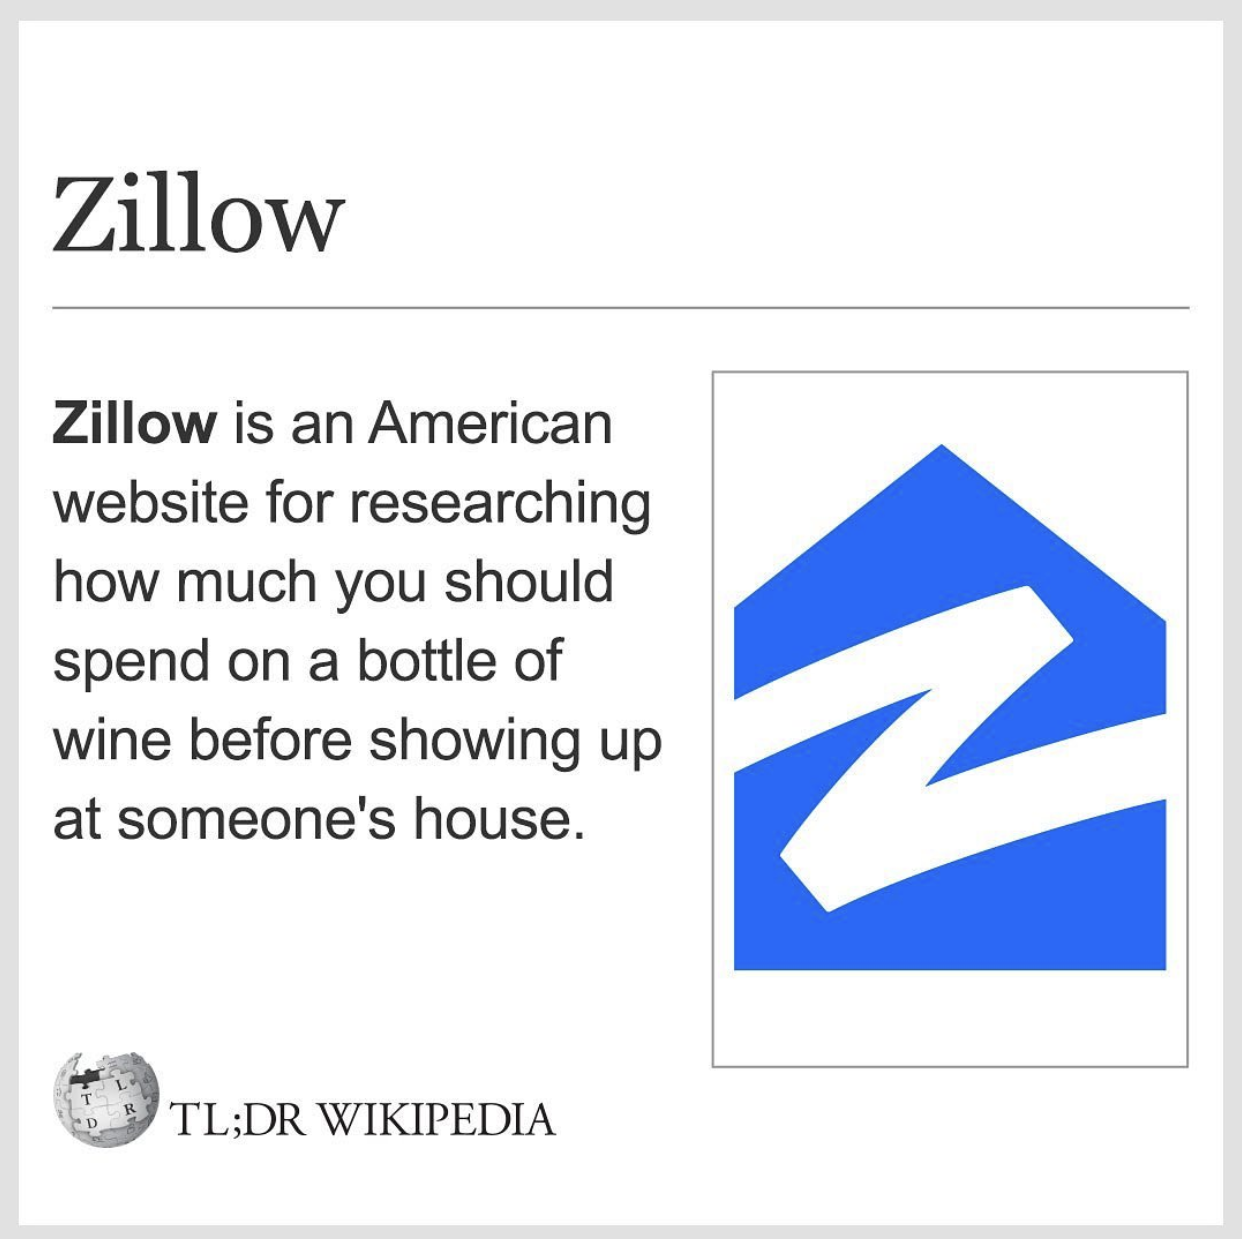 Wikipedia Memes - diagram - Zillow Zillow is an American website for researching how much you should spend on a bottle of wine before showing up at someone's house. N Tl;Dr Wikipedia